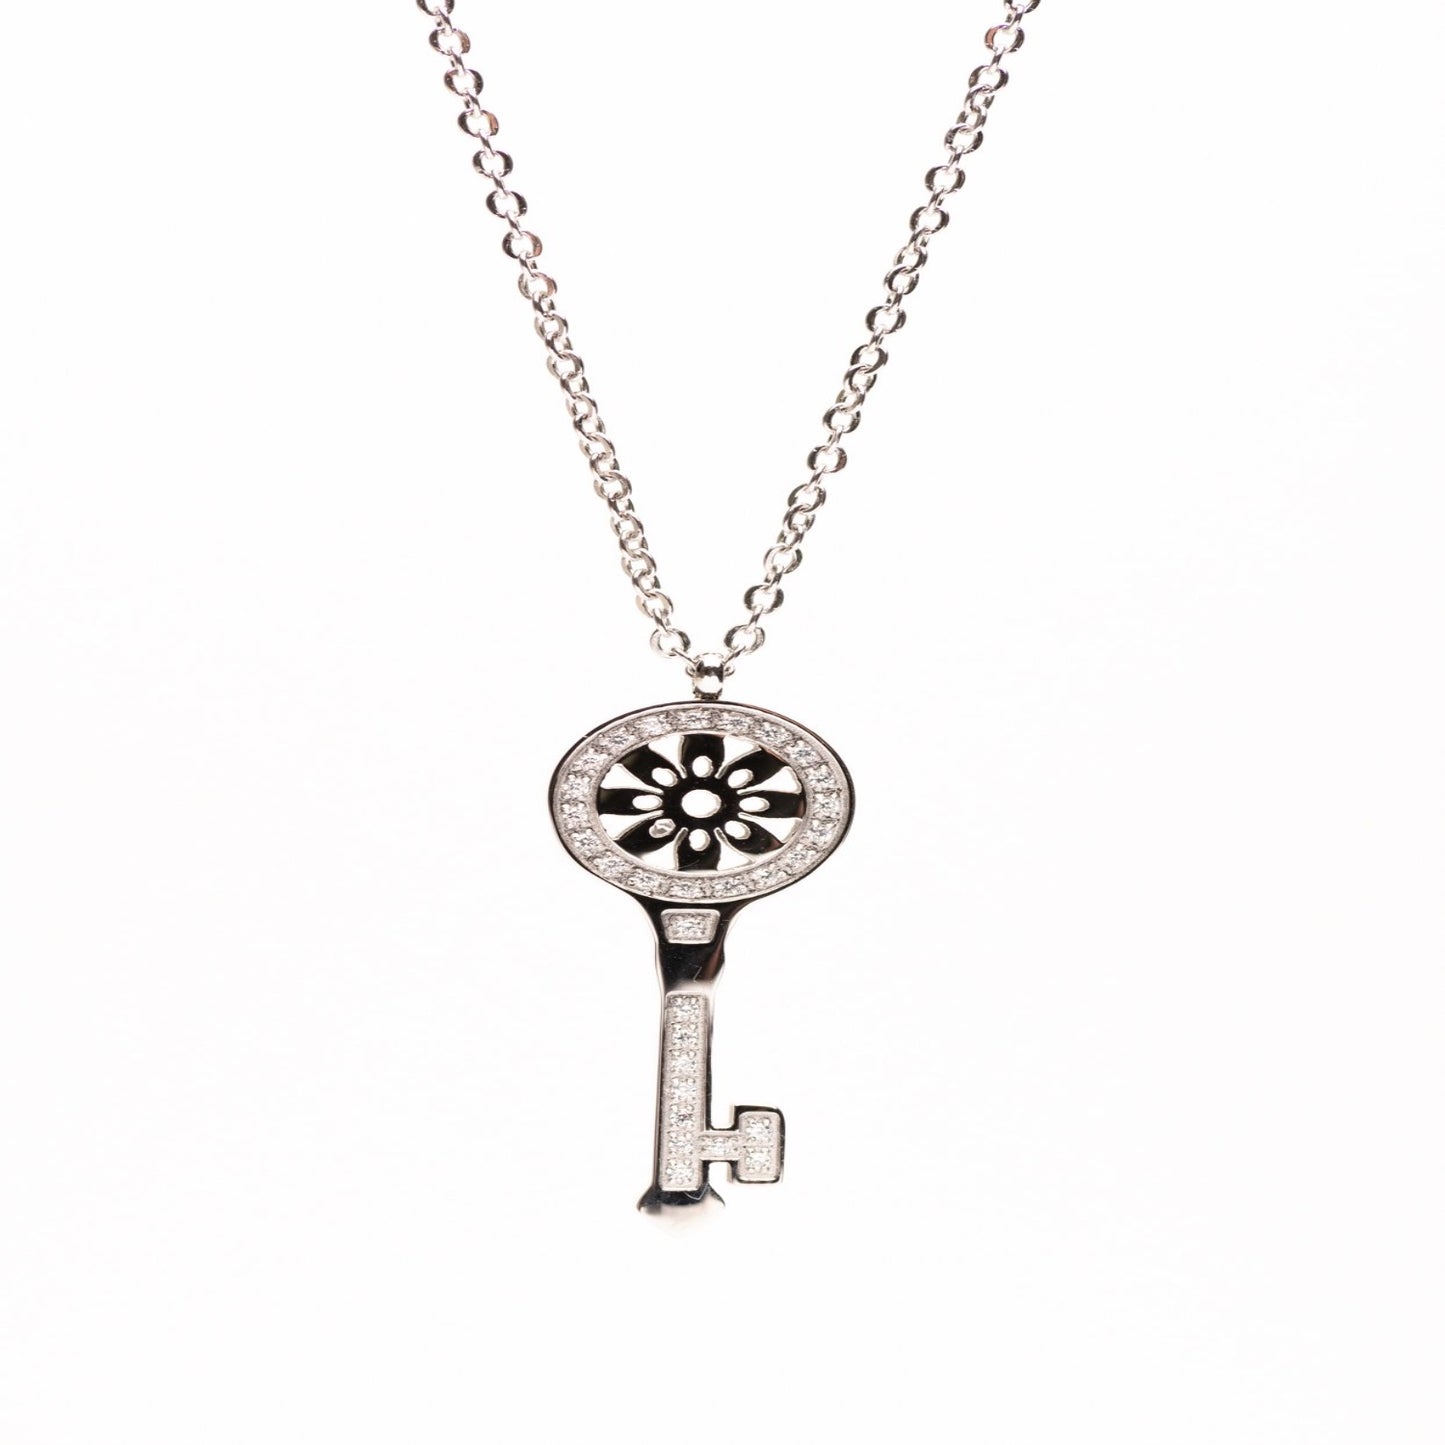 Stainless Steel Key for success  necklace with crystals